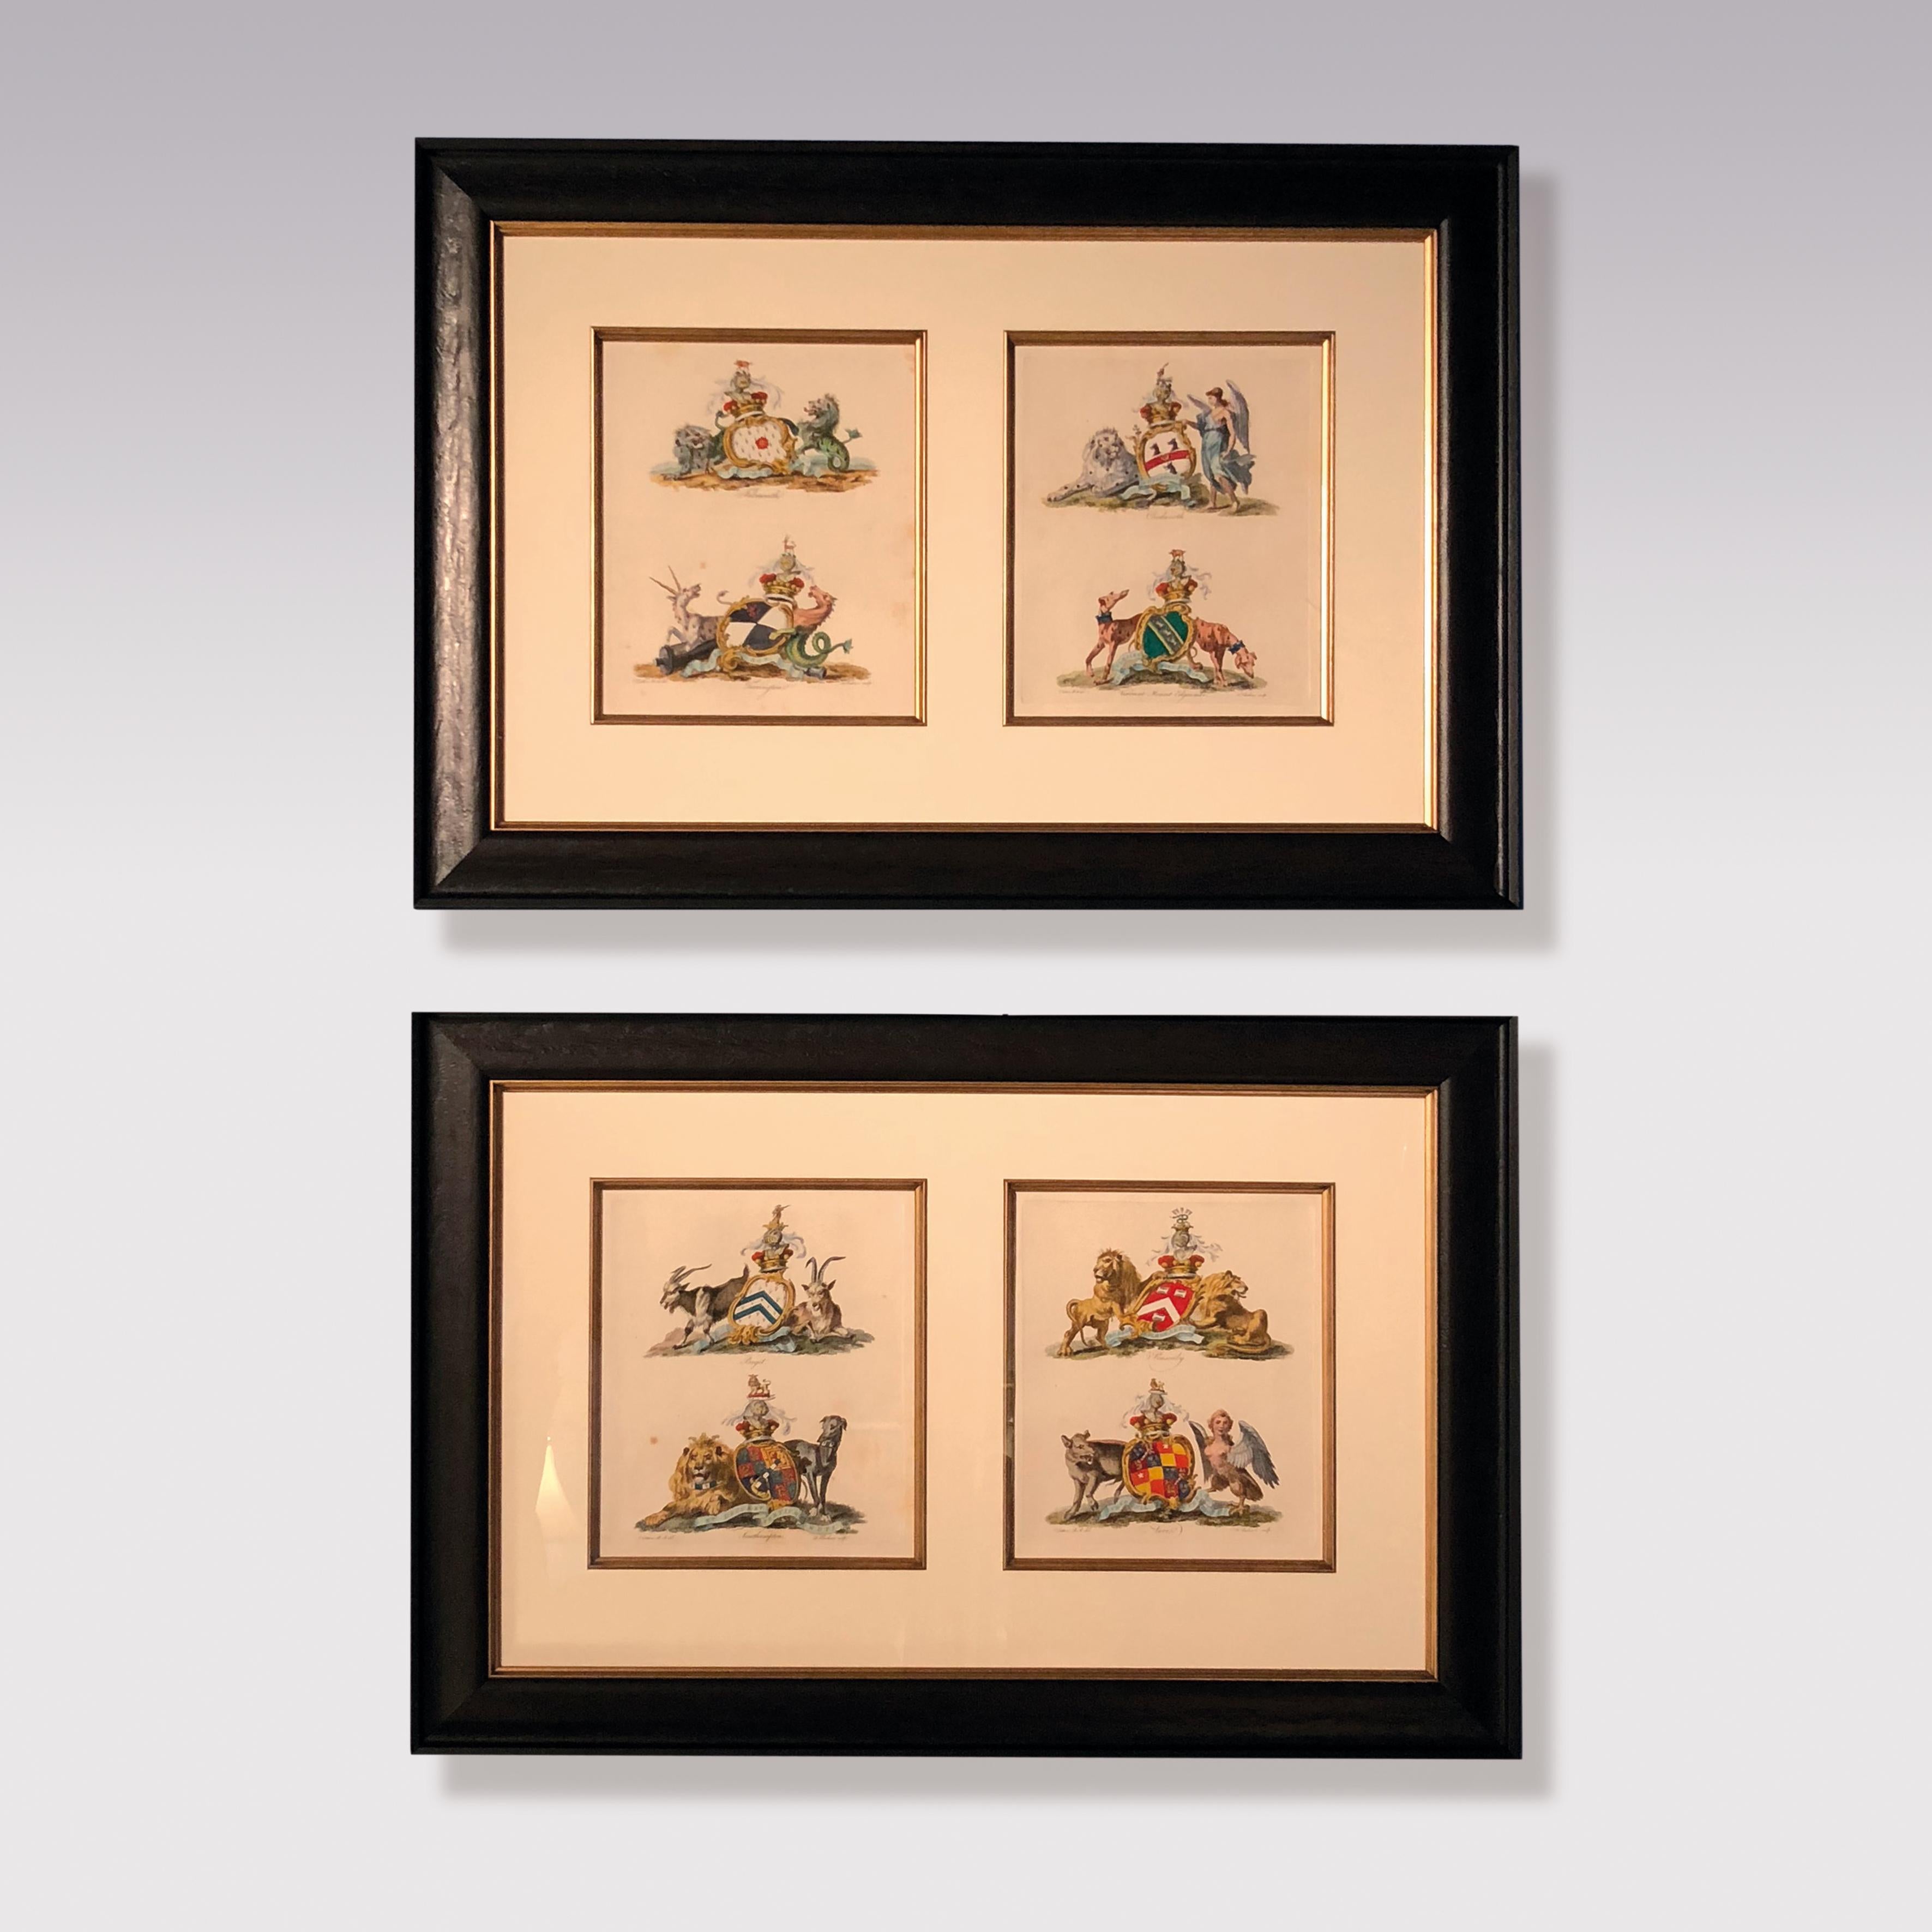 We have a series of these very attractive prints from the 1790, cut and beautifully hand coloured. Each coat of arms represent one of the grand aristocratic families of that age. They are housed in ebonised reeded frames with double mounts and